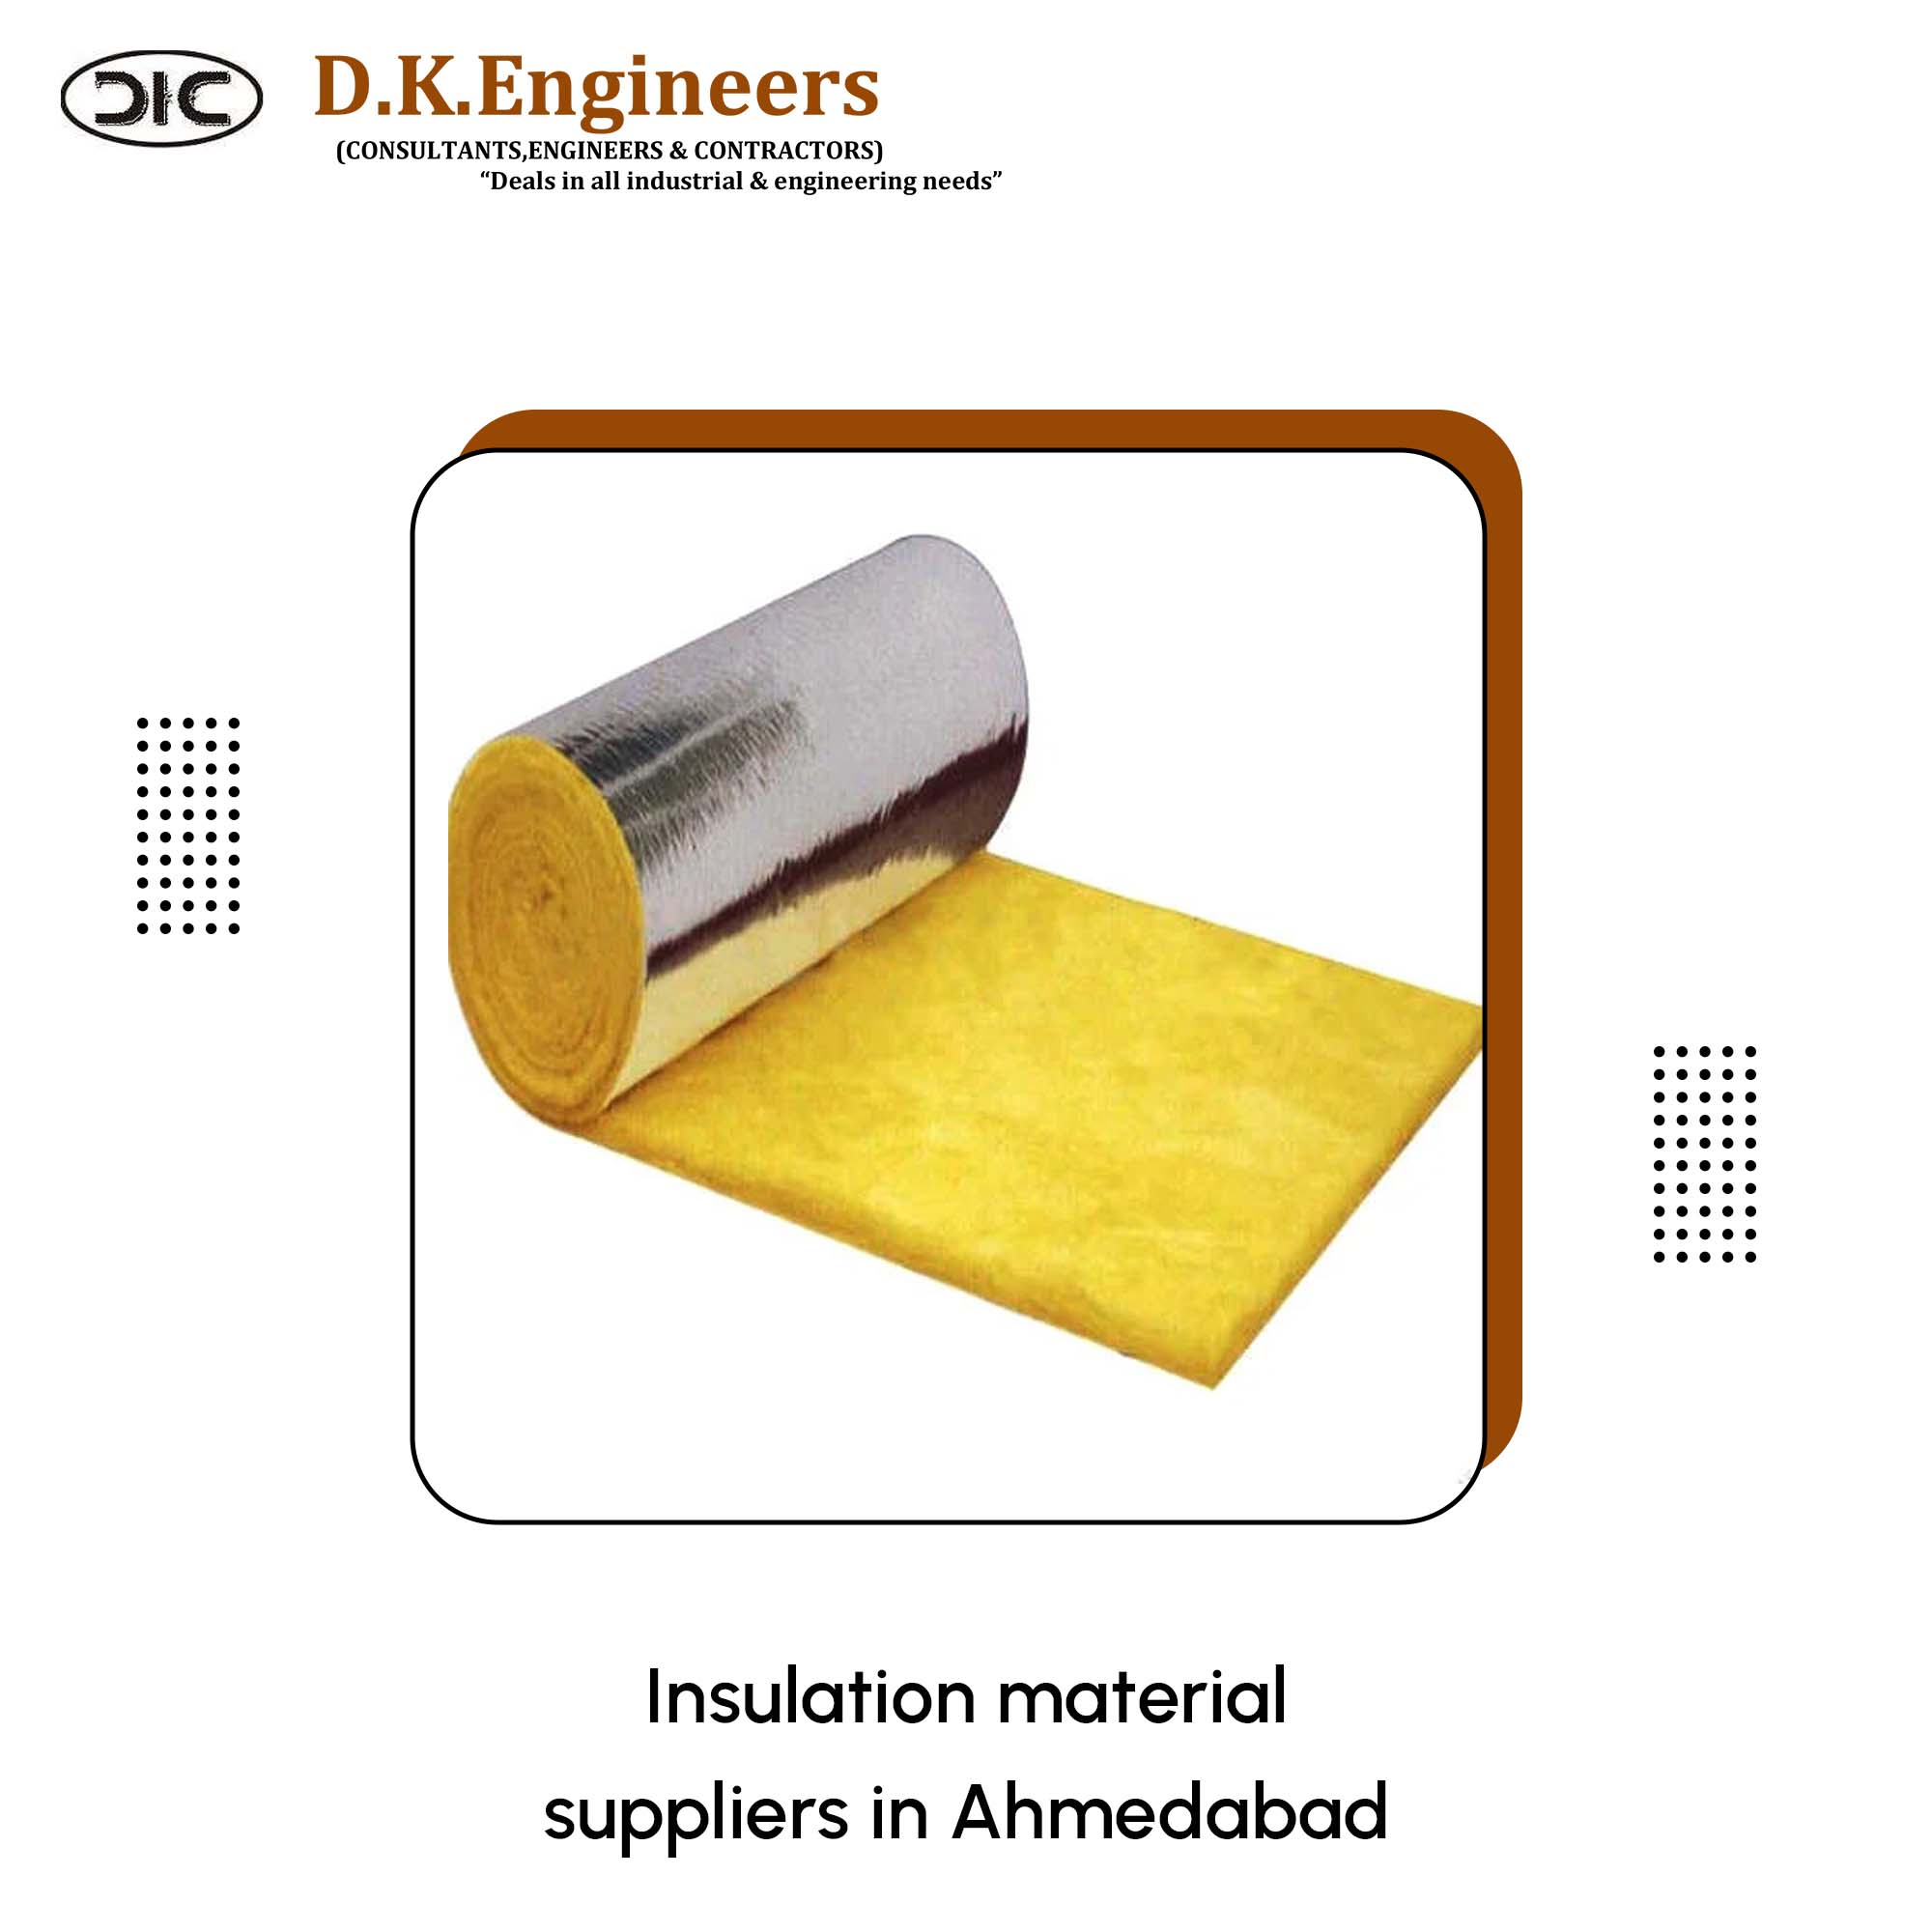 Insulation material suppliers in Ahmedabad